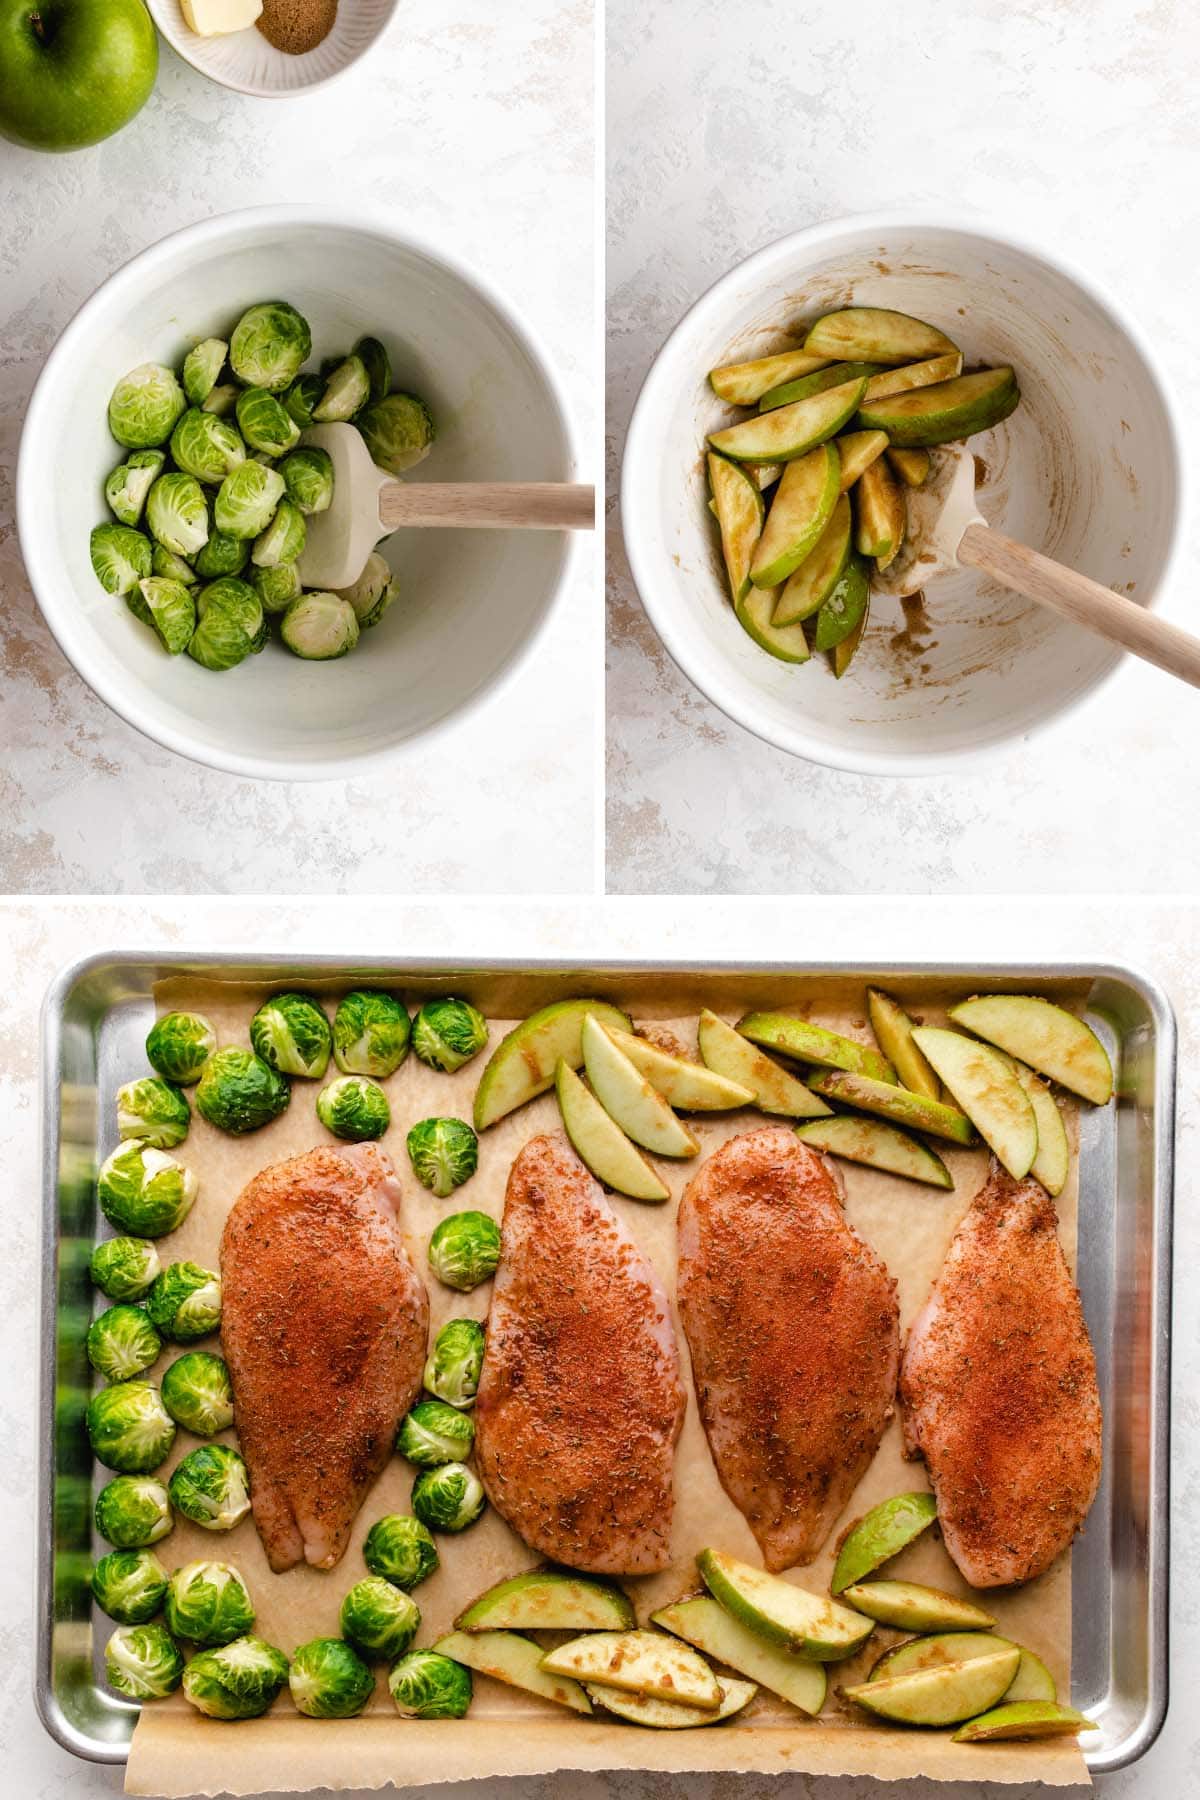 A collage showing the Brussels sprouts and apple slices being tossed in a white bowl, and the uncooked food on a sheet pan.